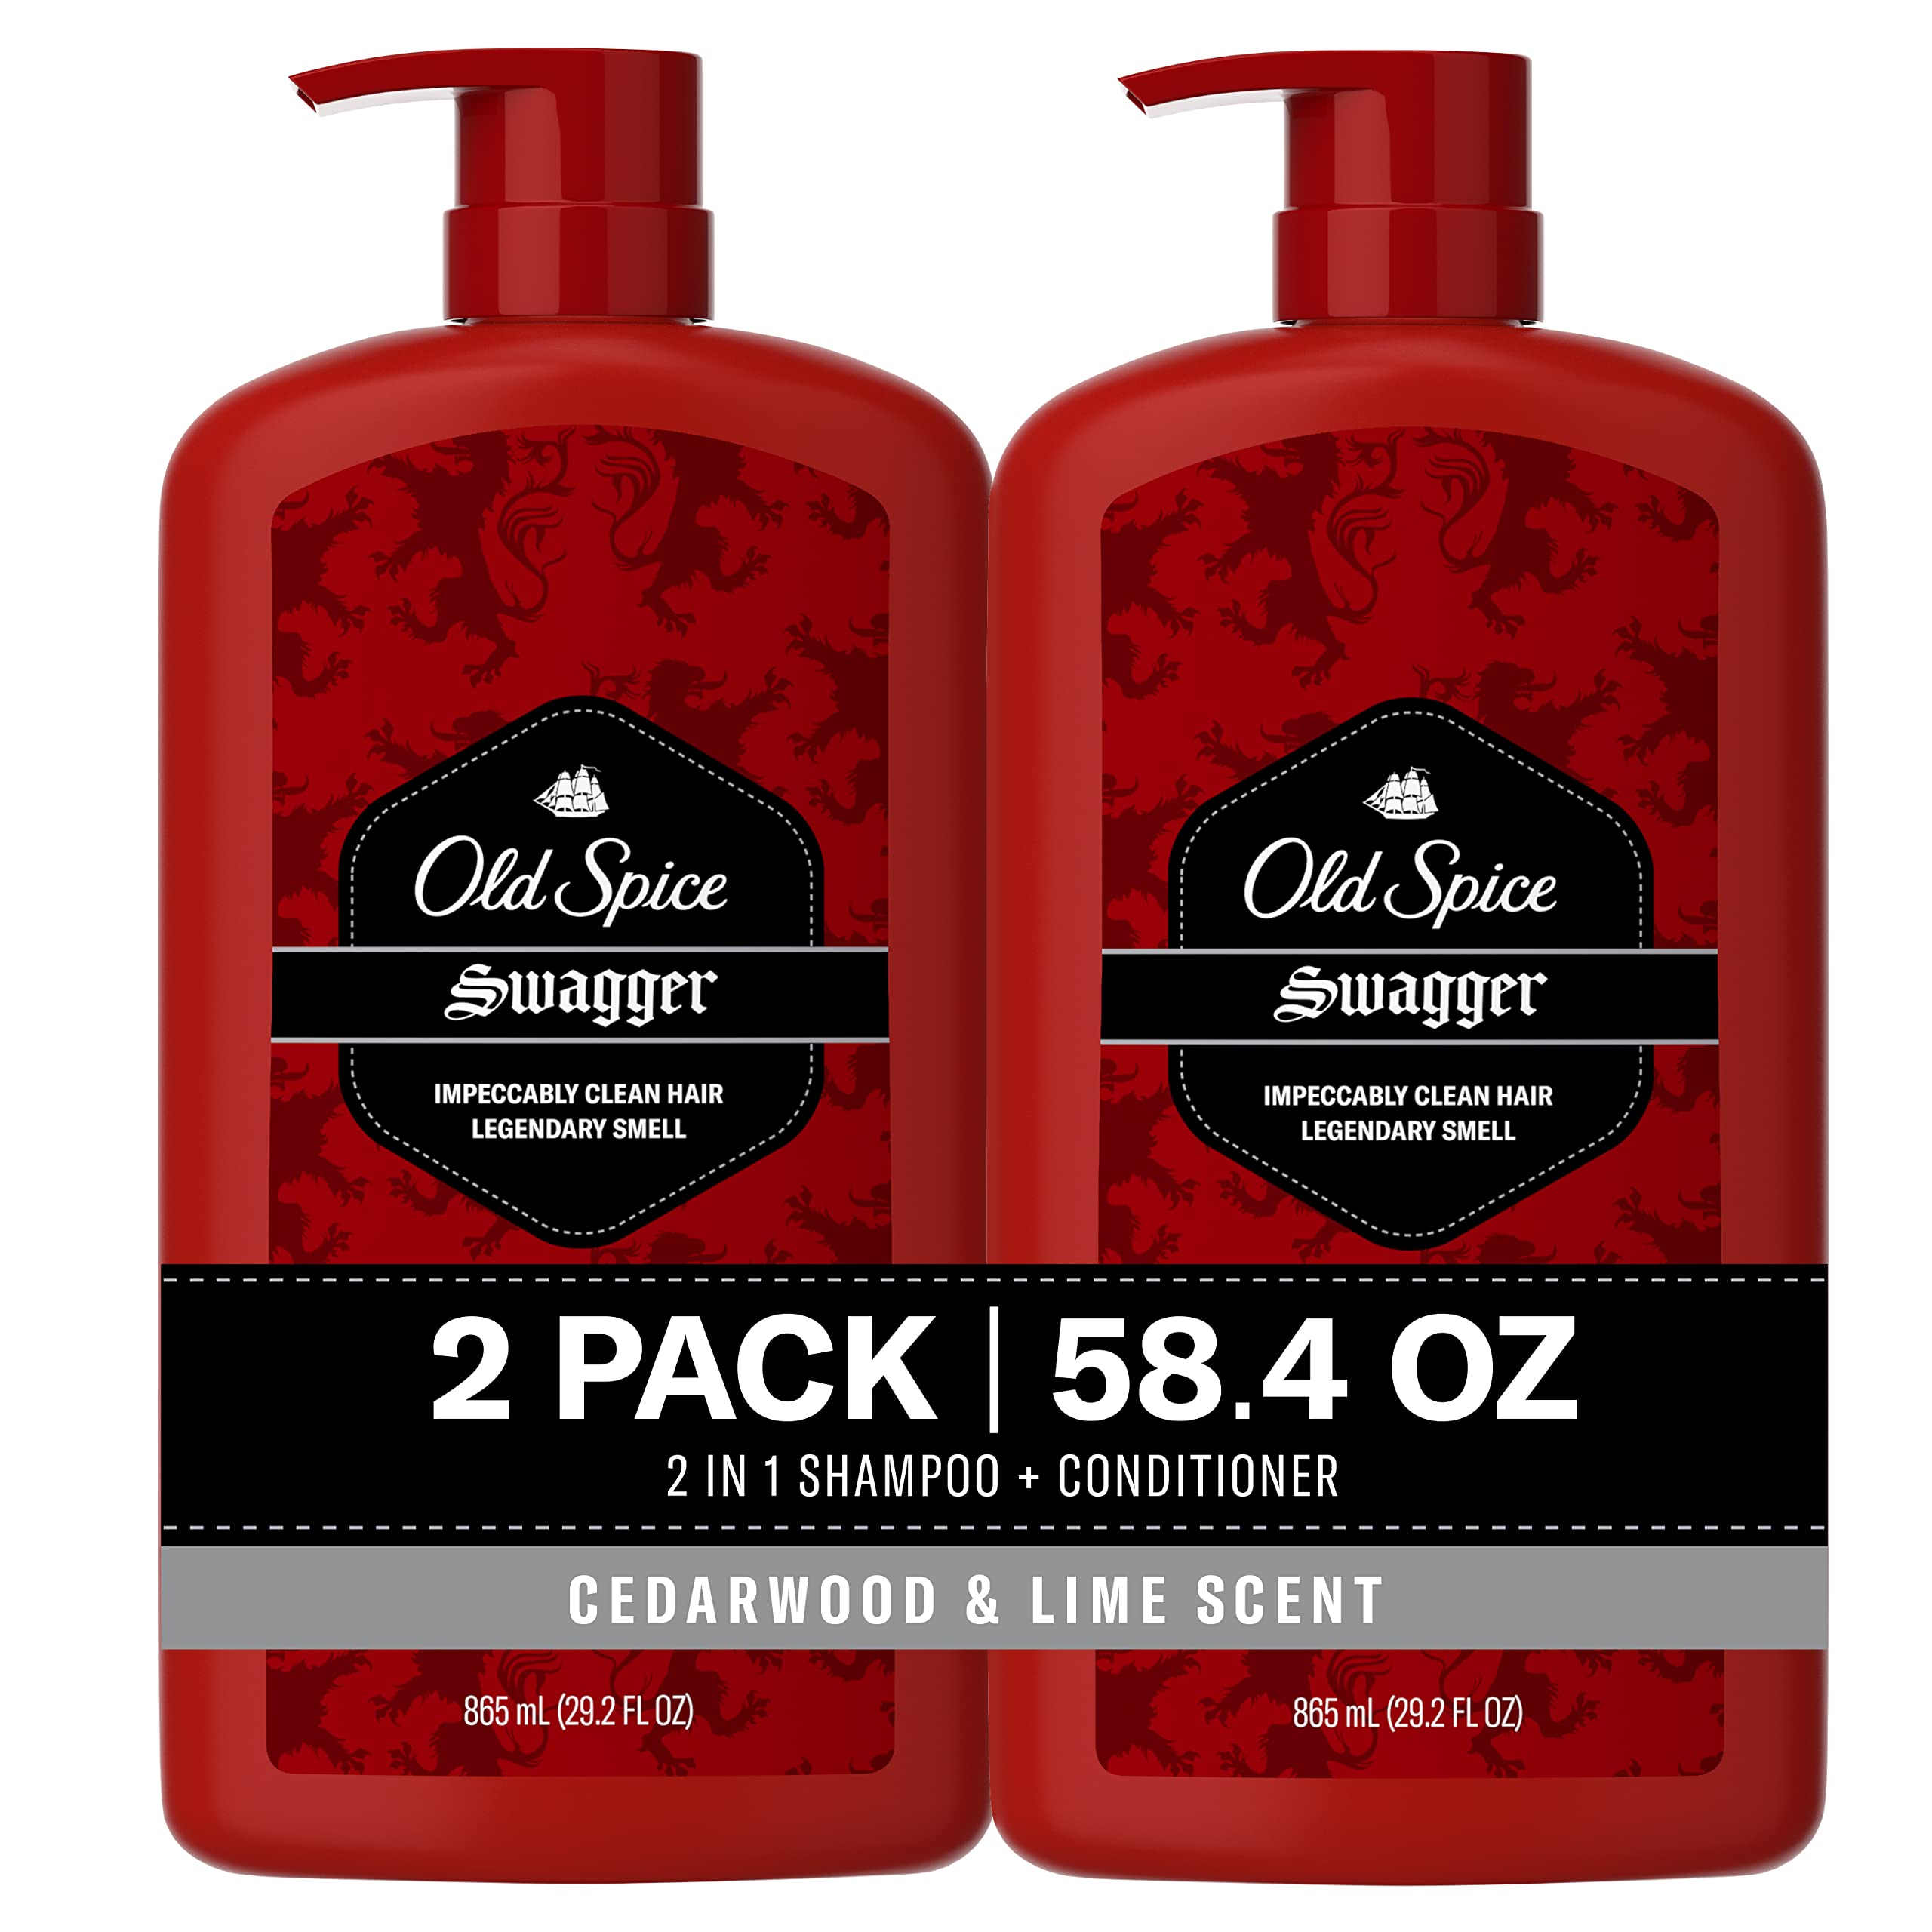 Old Spice Swagger 2-in-1 Shampoo and Conditioner for Men, 29.2 Fl Oz (Pack of 2)